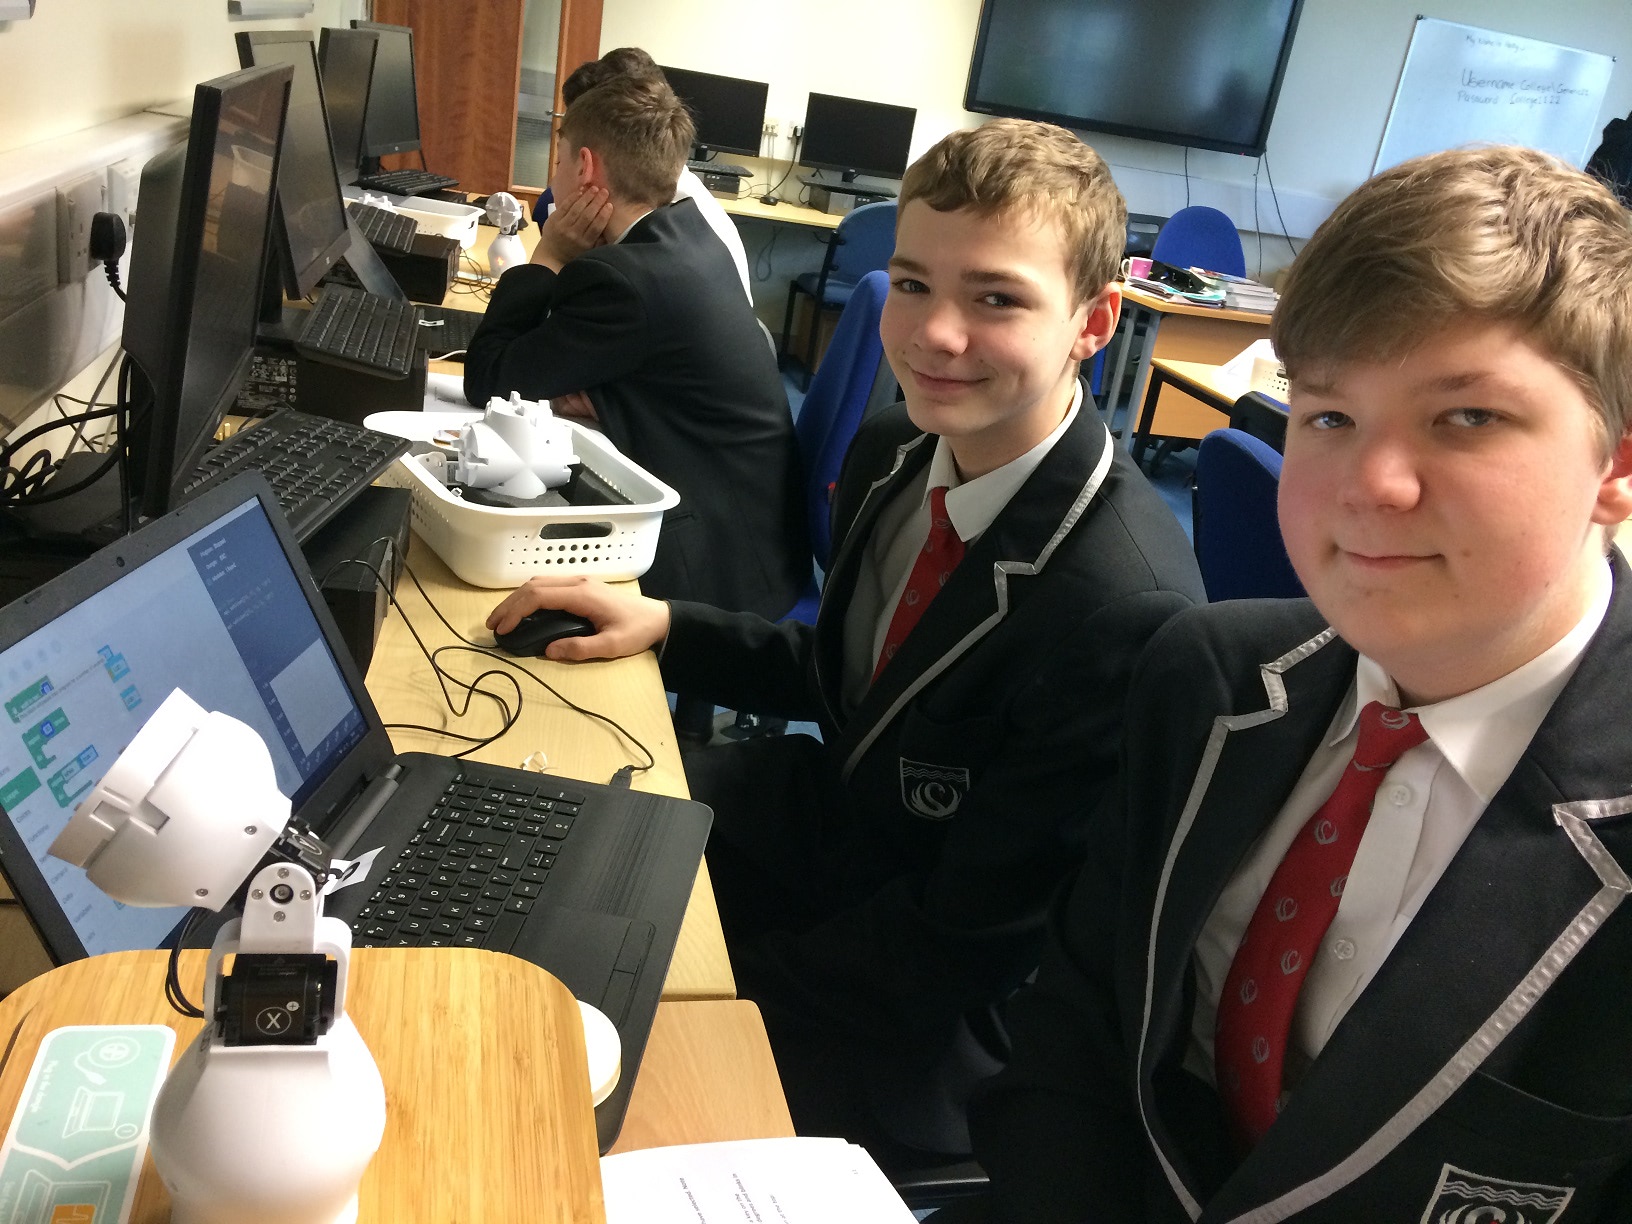 wo pupils from Kirk Hallam Community Academy are pictured programming Fable robots